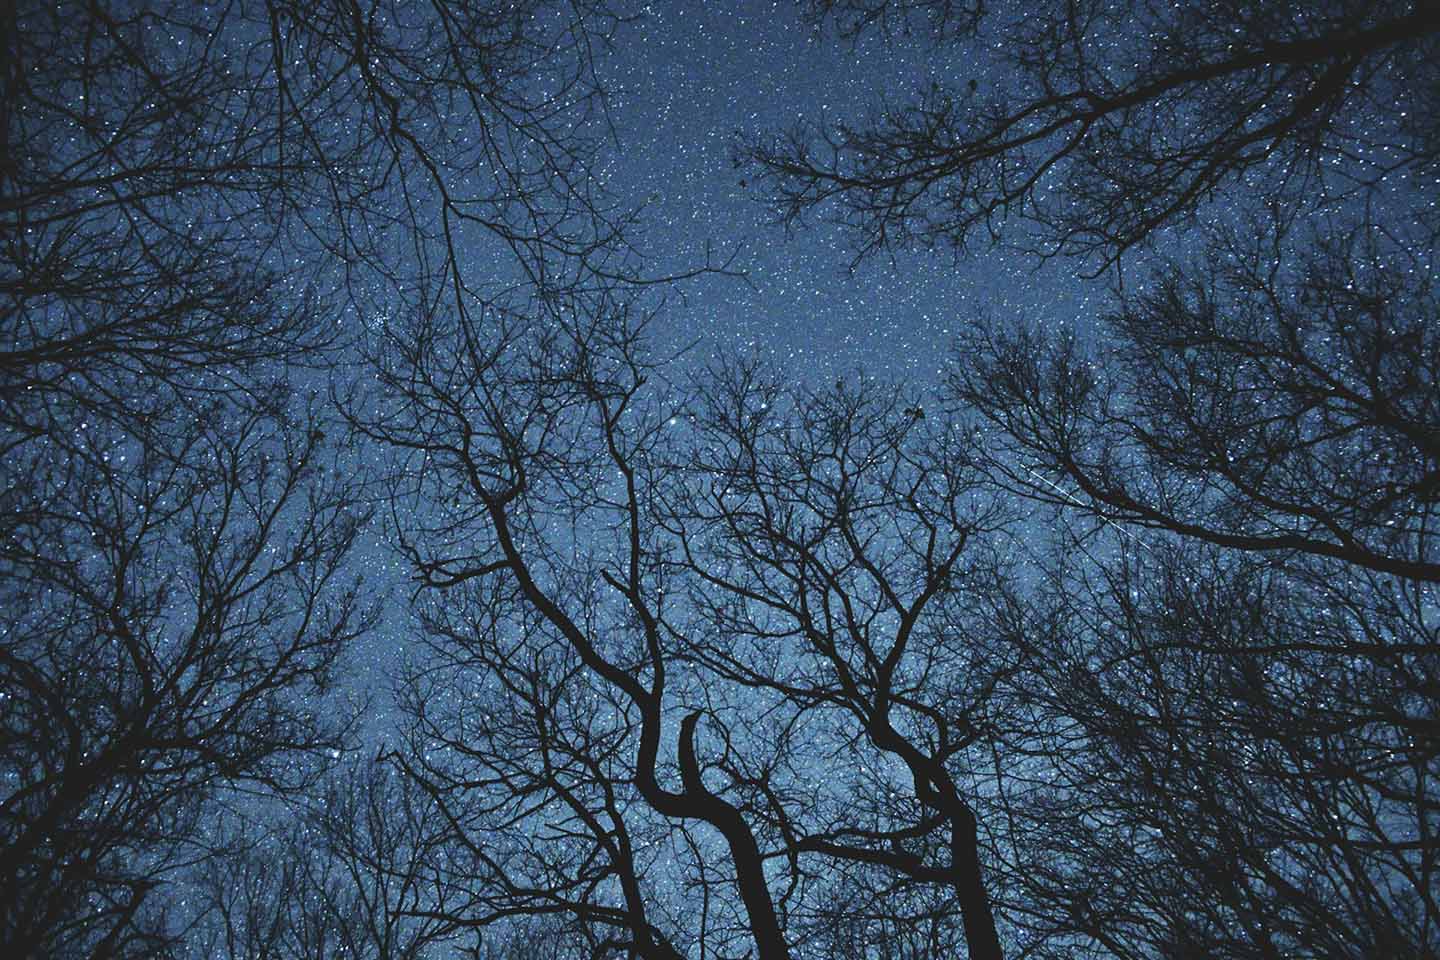 Starry night sky seen from below through silhouettes of trees.